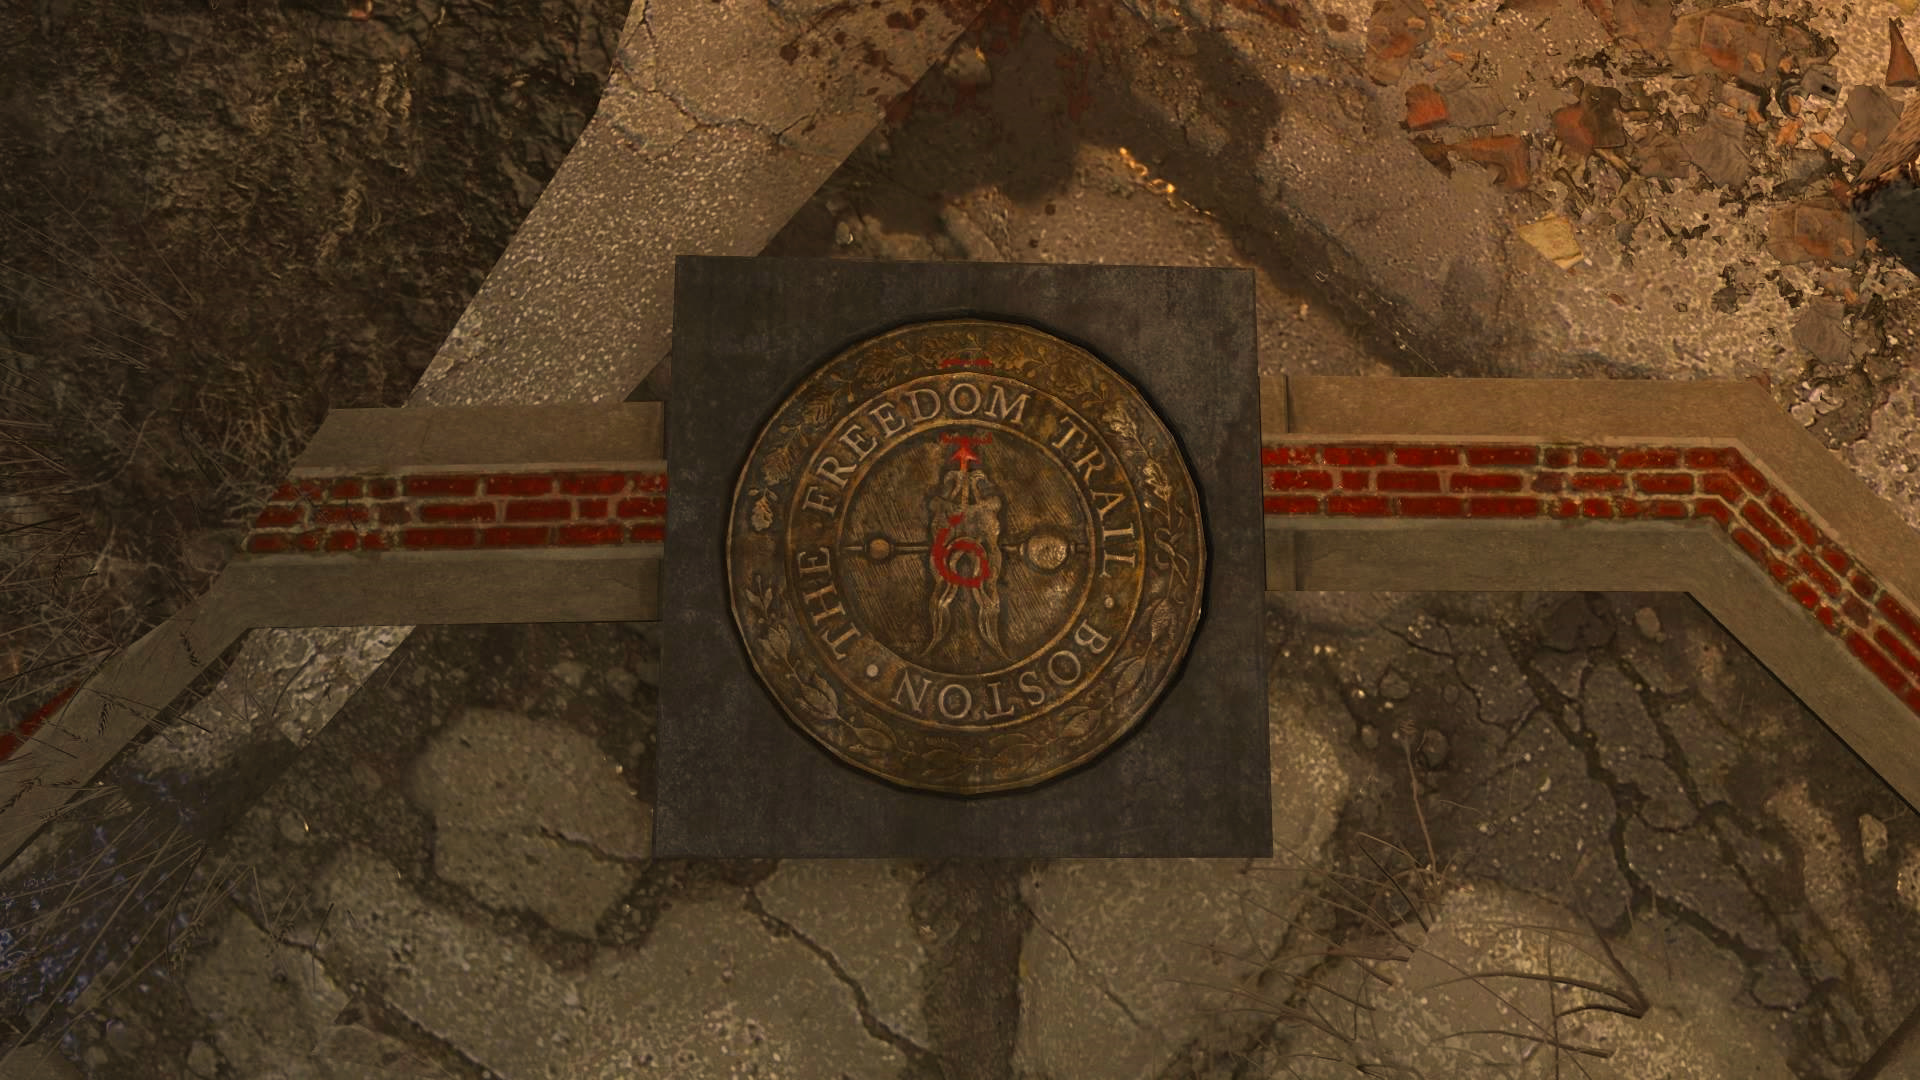 freedom trail map fallout4